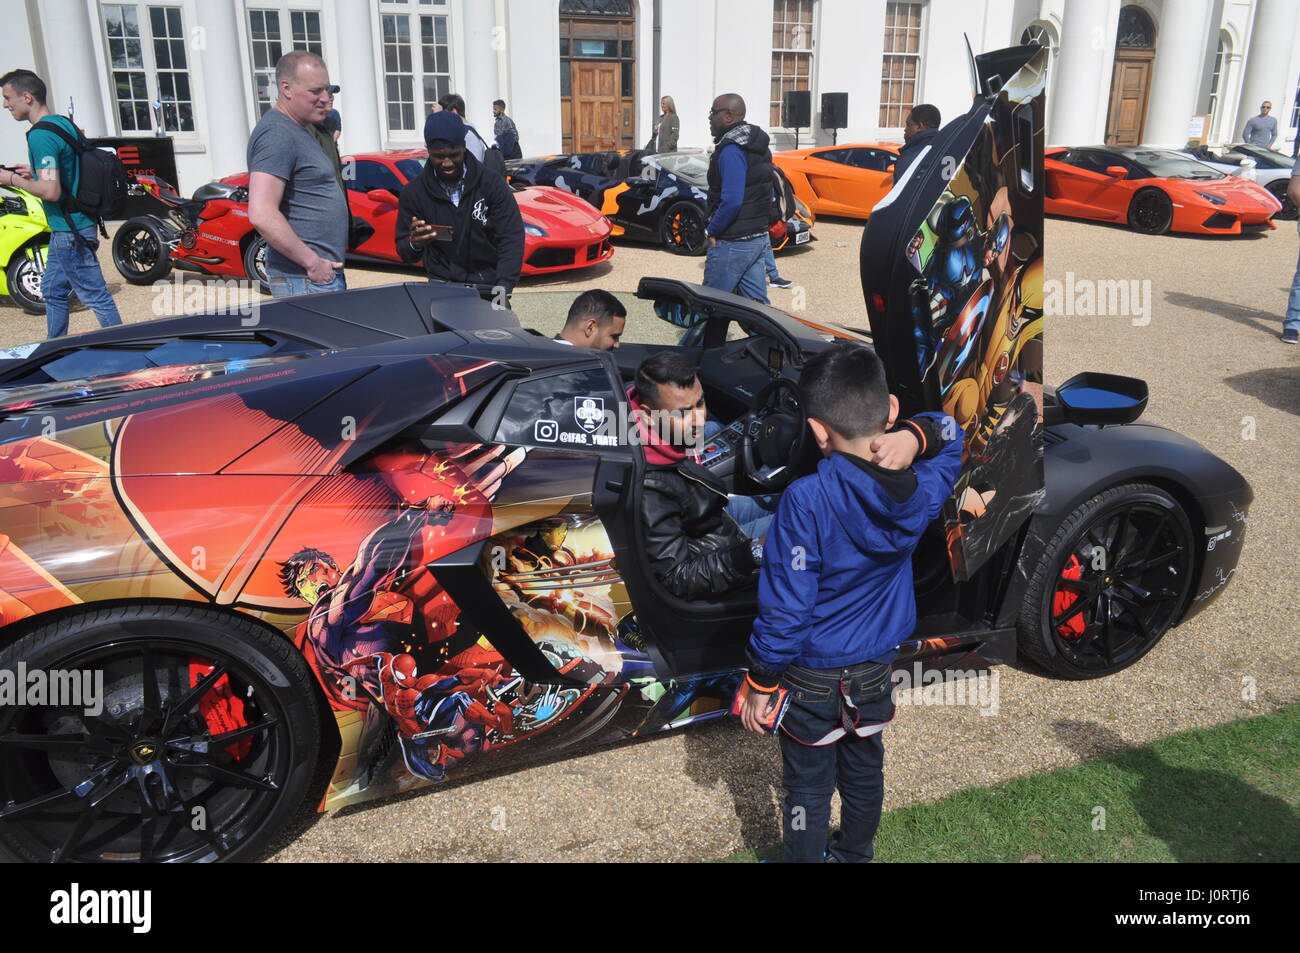 Chelmsford, UK. 15th Apr, 2017. Rhys Daniels Trust and Insursec Risk  Management in partnership with Ruk Technology and Gms Club proudly present the first Supercar Saturday at the famous Hylands House. A free event with many activities for all the family including rides in some of the most amazing super cars on the planet with all proceeds going to the Rhys Daniels Trust Charity. Credit: Ricardo Maynard/Alamy Live News Stock Photo